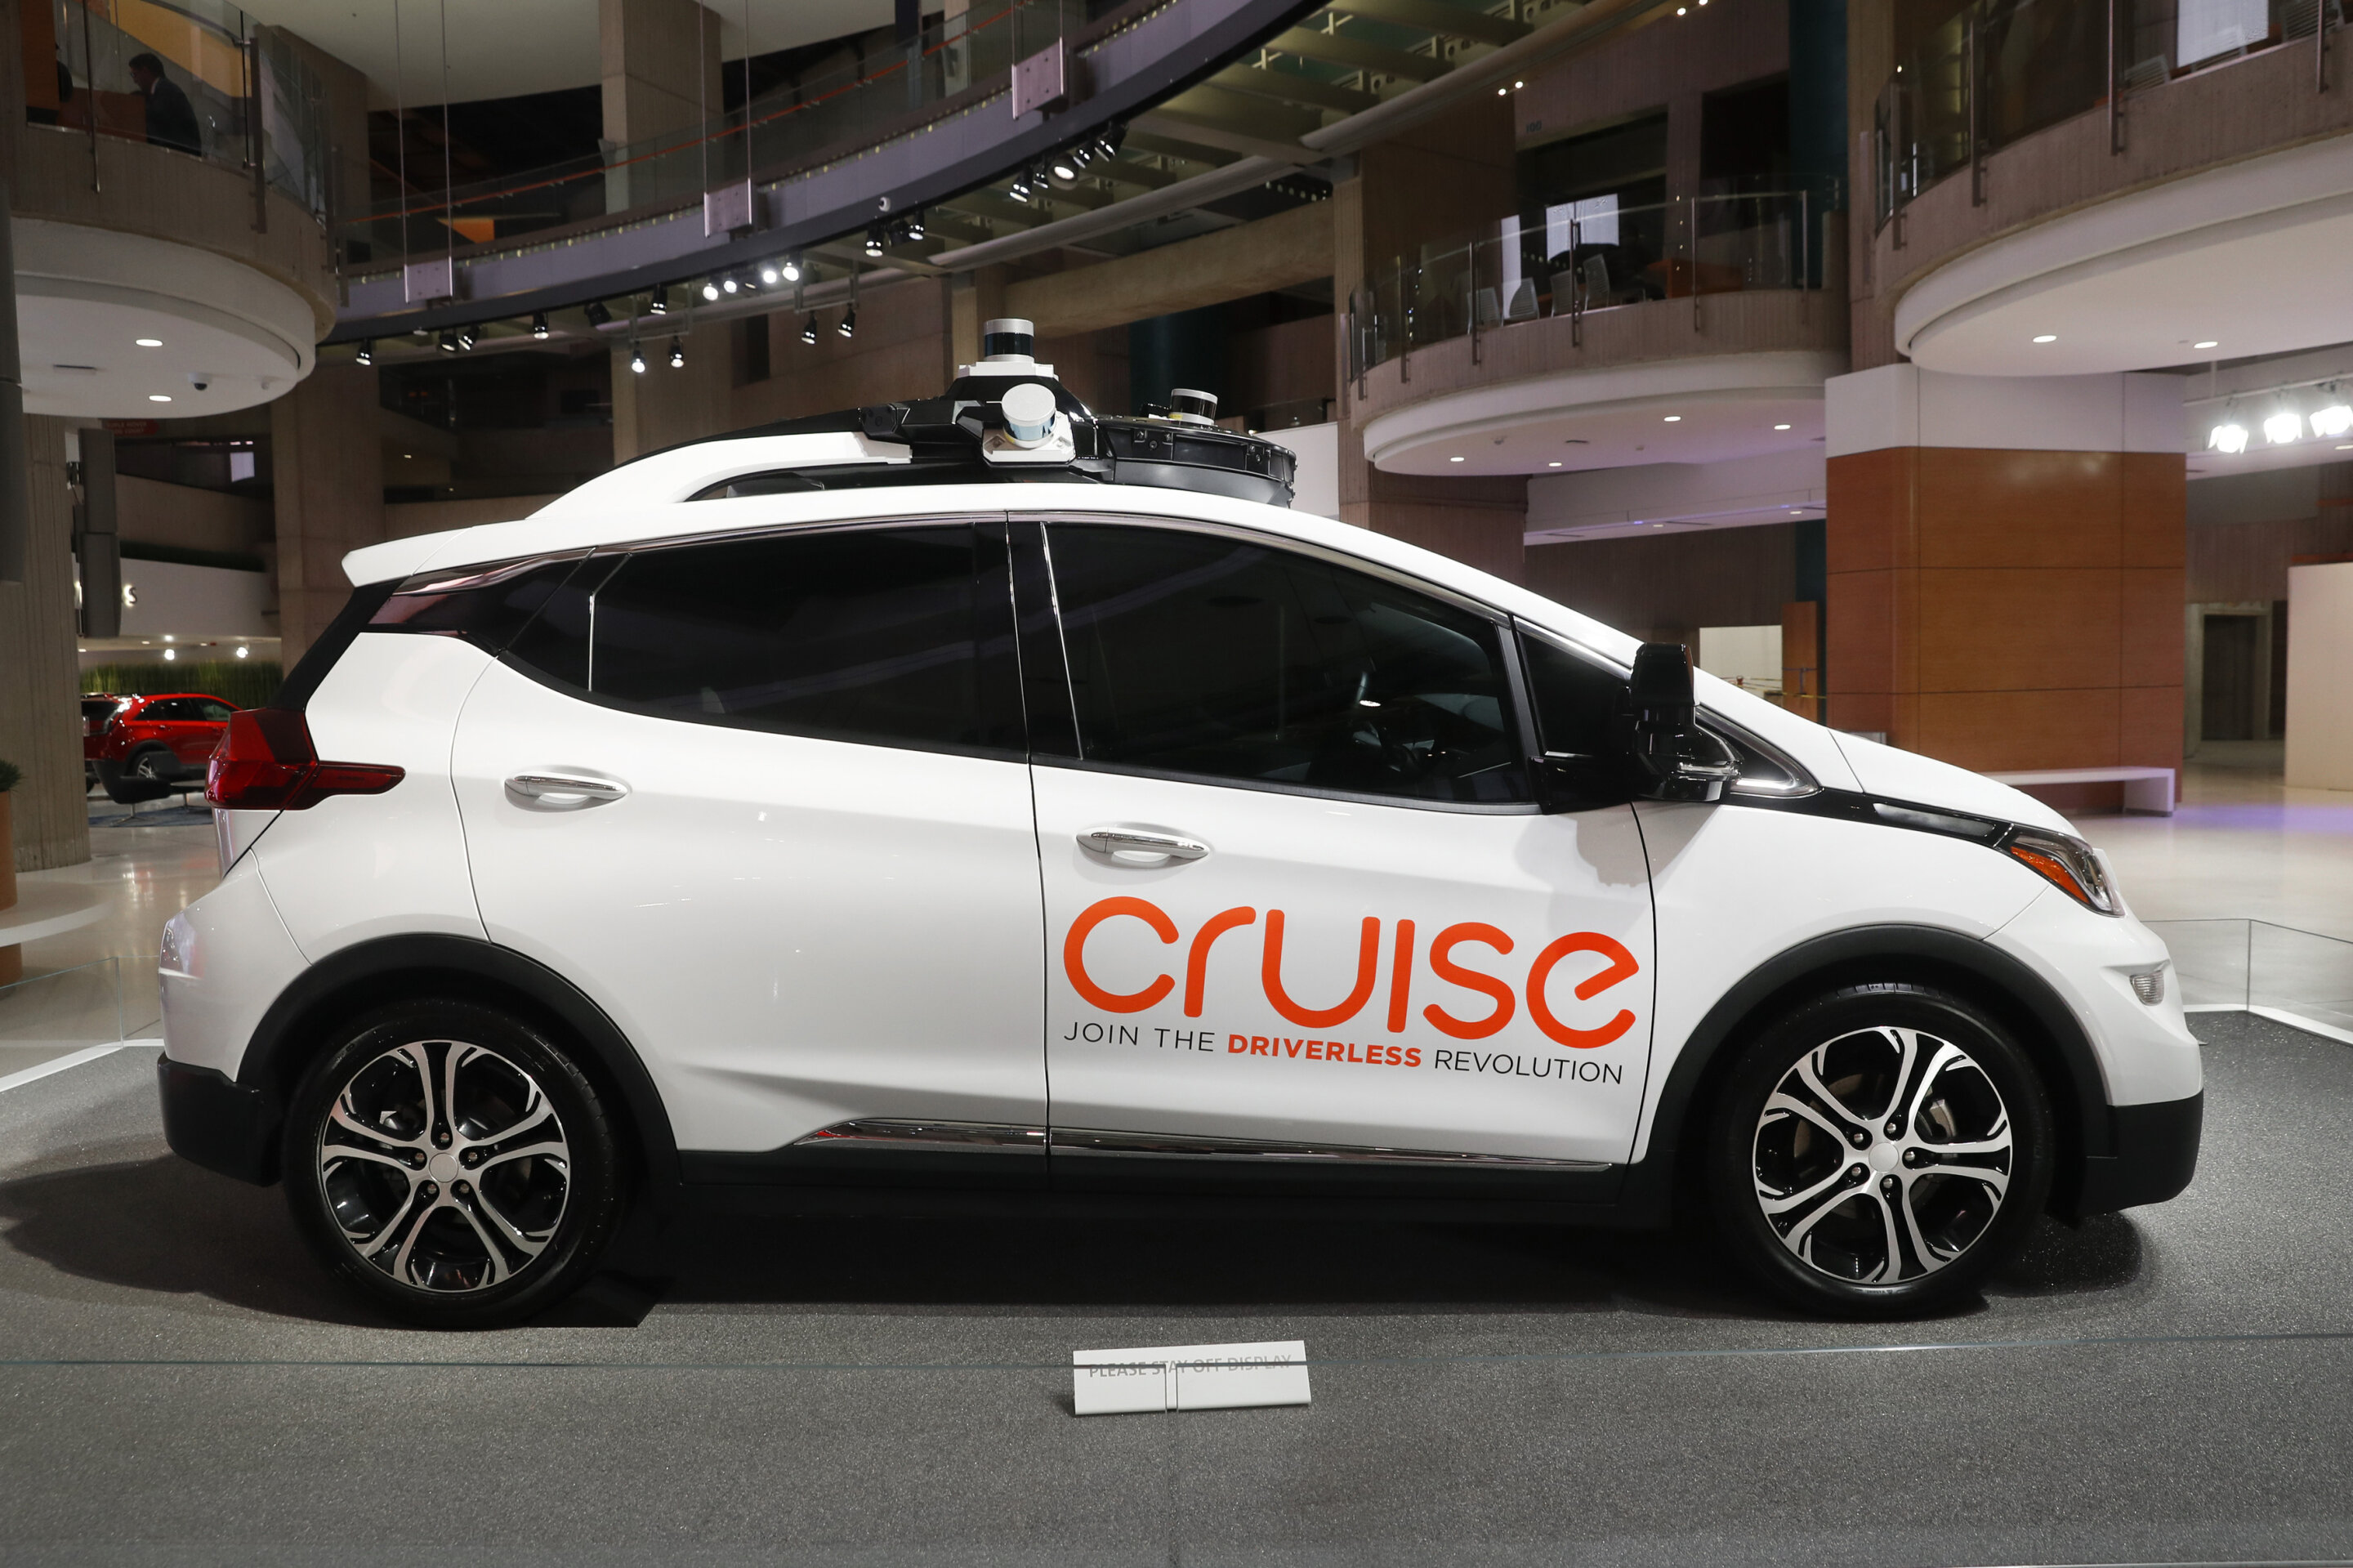 GM’s Cruise autonomous vehicle unit agrees to cut fleet in half after 2 crashes in San Francisco